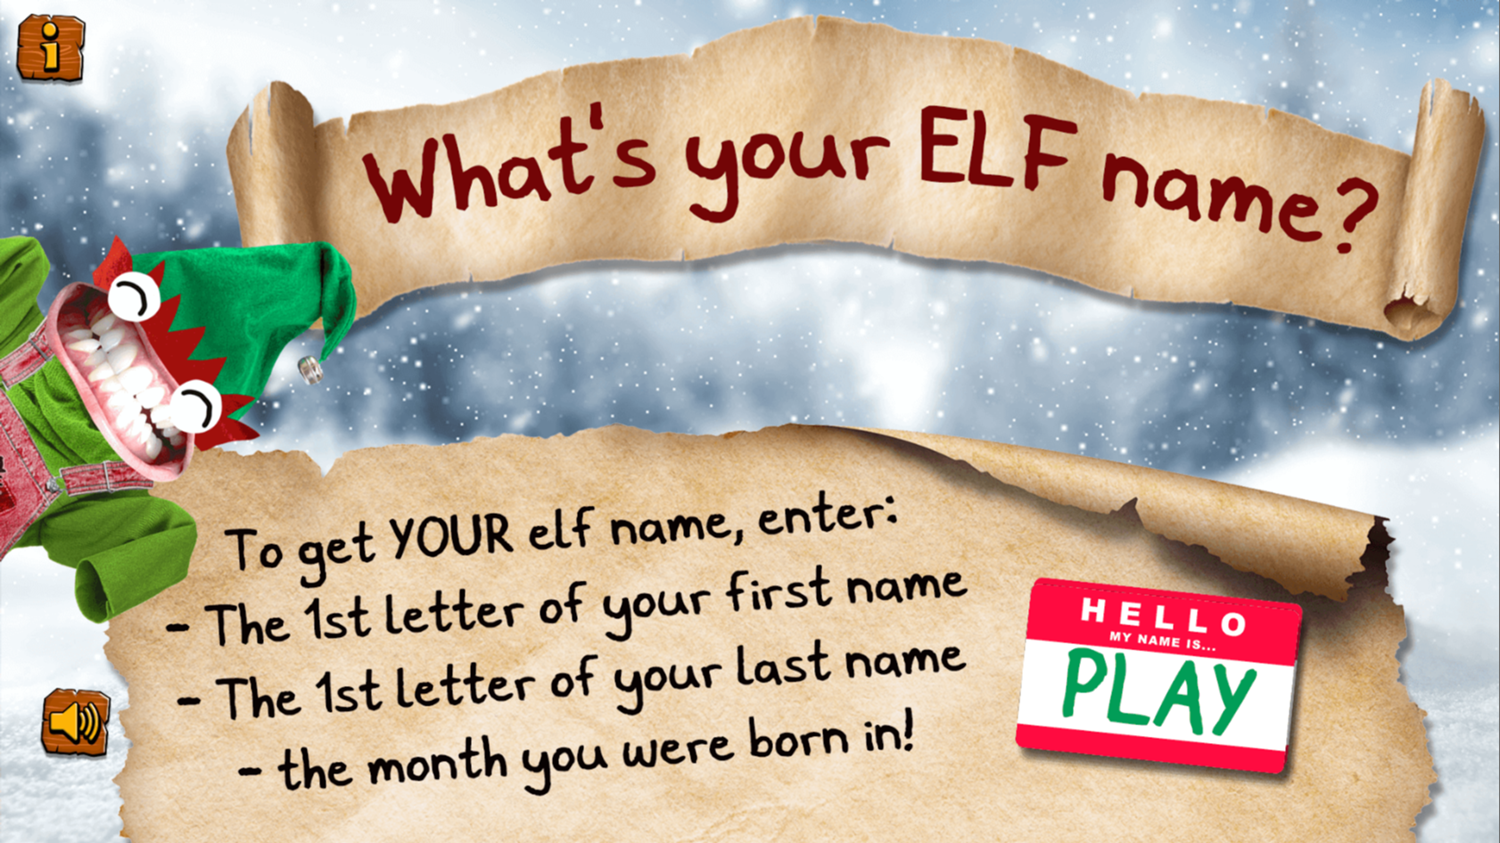 What's Your Elf Name Game Welcome Screen Screenshot.